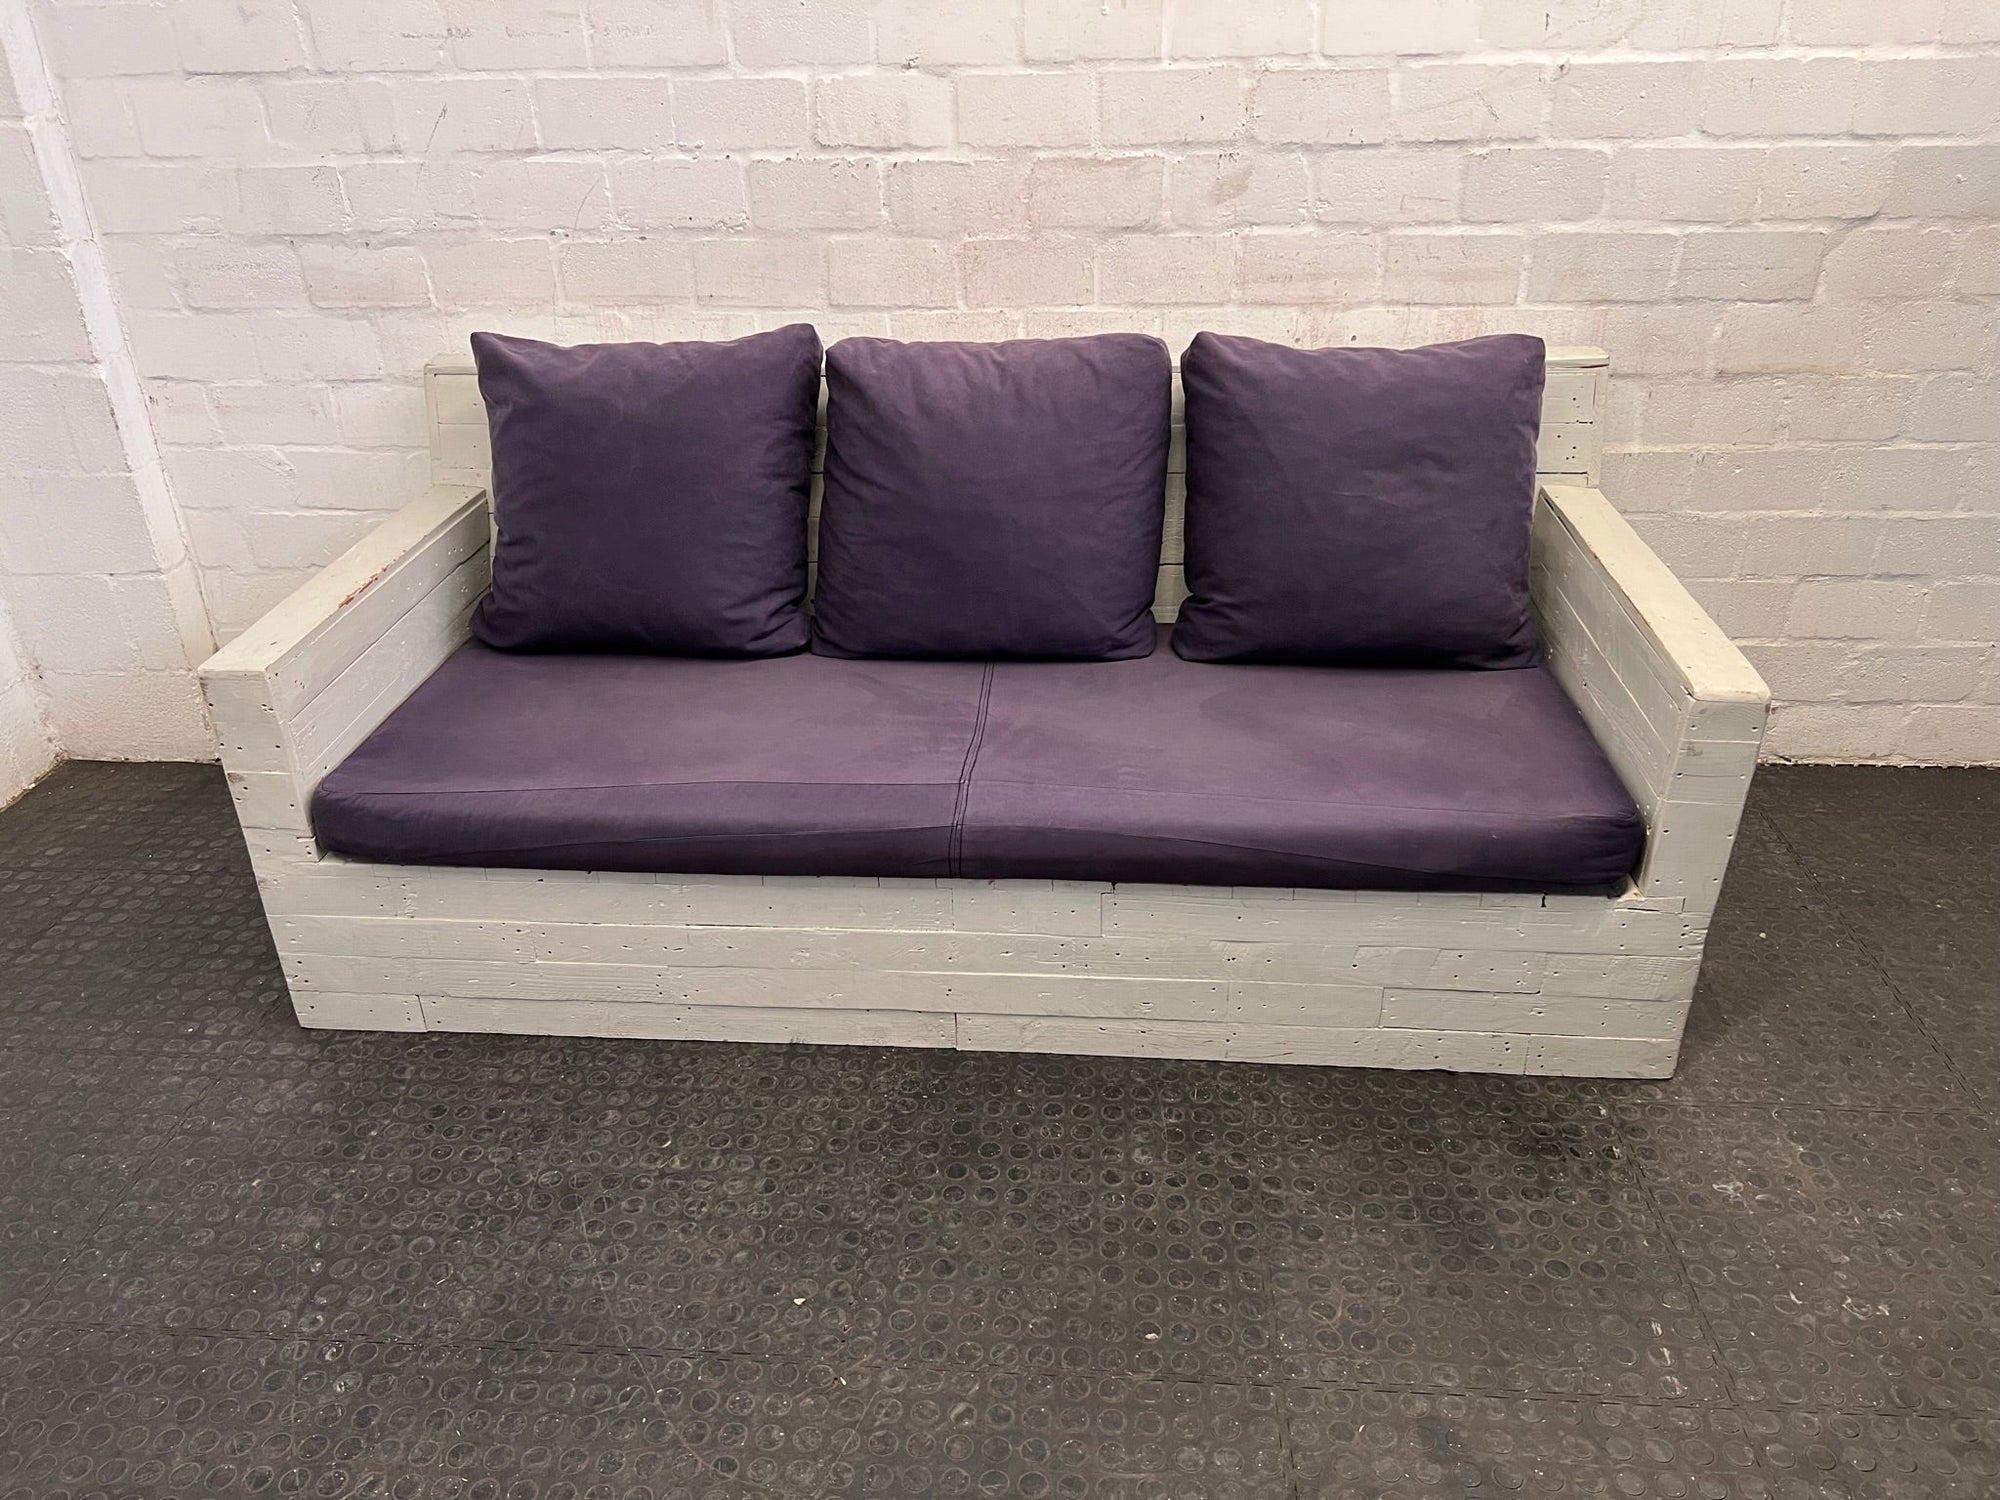 White Pallet Wood Three Seater Couch with Deep Purple Cushions